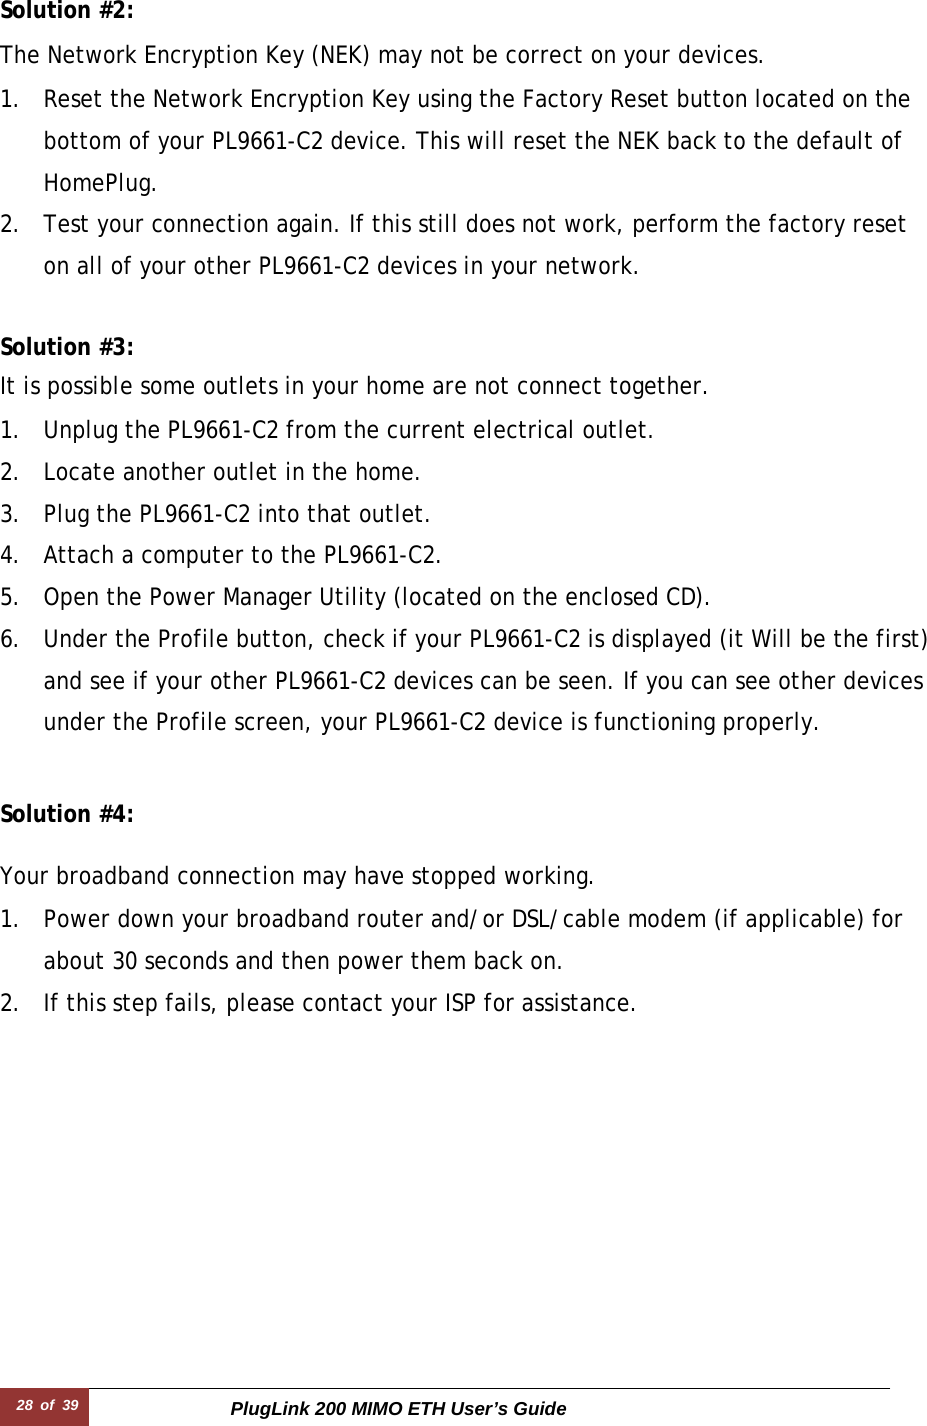 28  of  39 PlugLink 200 MIMO ETH User’s Guide  Solution #2:  The Network Encryption Key (NEK) may not be correct on your devices.  1. Reset the Network Encryption Key using the Factory Reset button located on the bottom of your PL9661-C2 device. This will reset the NEK back to the default of HomePlug. 2. Test your connection again. If this still does not work, perform the factory reset on all of your other PL9661-C2 devices in your network.   Solution #3:  It is possible some outlets in your home are not connect together.  1. Unplug the PL9661-C2 from the current electrical outlet. 2. Locate another outlet in the home. 3. Plug the PL9661-C2 into that outlet. 4. Attach a computer to the PL9661-C2. 5. Open the Power Manager Utility (located on the enclosed CD). 6. Under the Profile button, check if your PL9661-C2 is displayed (it Will be the first) and see if your other PL9661-C2 devices can be seen. If you can see other devices under the Profile screen, your PL9661-C2 device is functioning properly.   Solution #4:  Your broadband connection may have stopped working.  1. Power down your broadband router and/or DSL/cable modem (if applicable) for about 30 seconds and then power them back on. 2. If this step fails, please contact your ISP for assistance. 